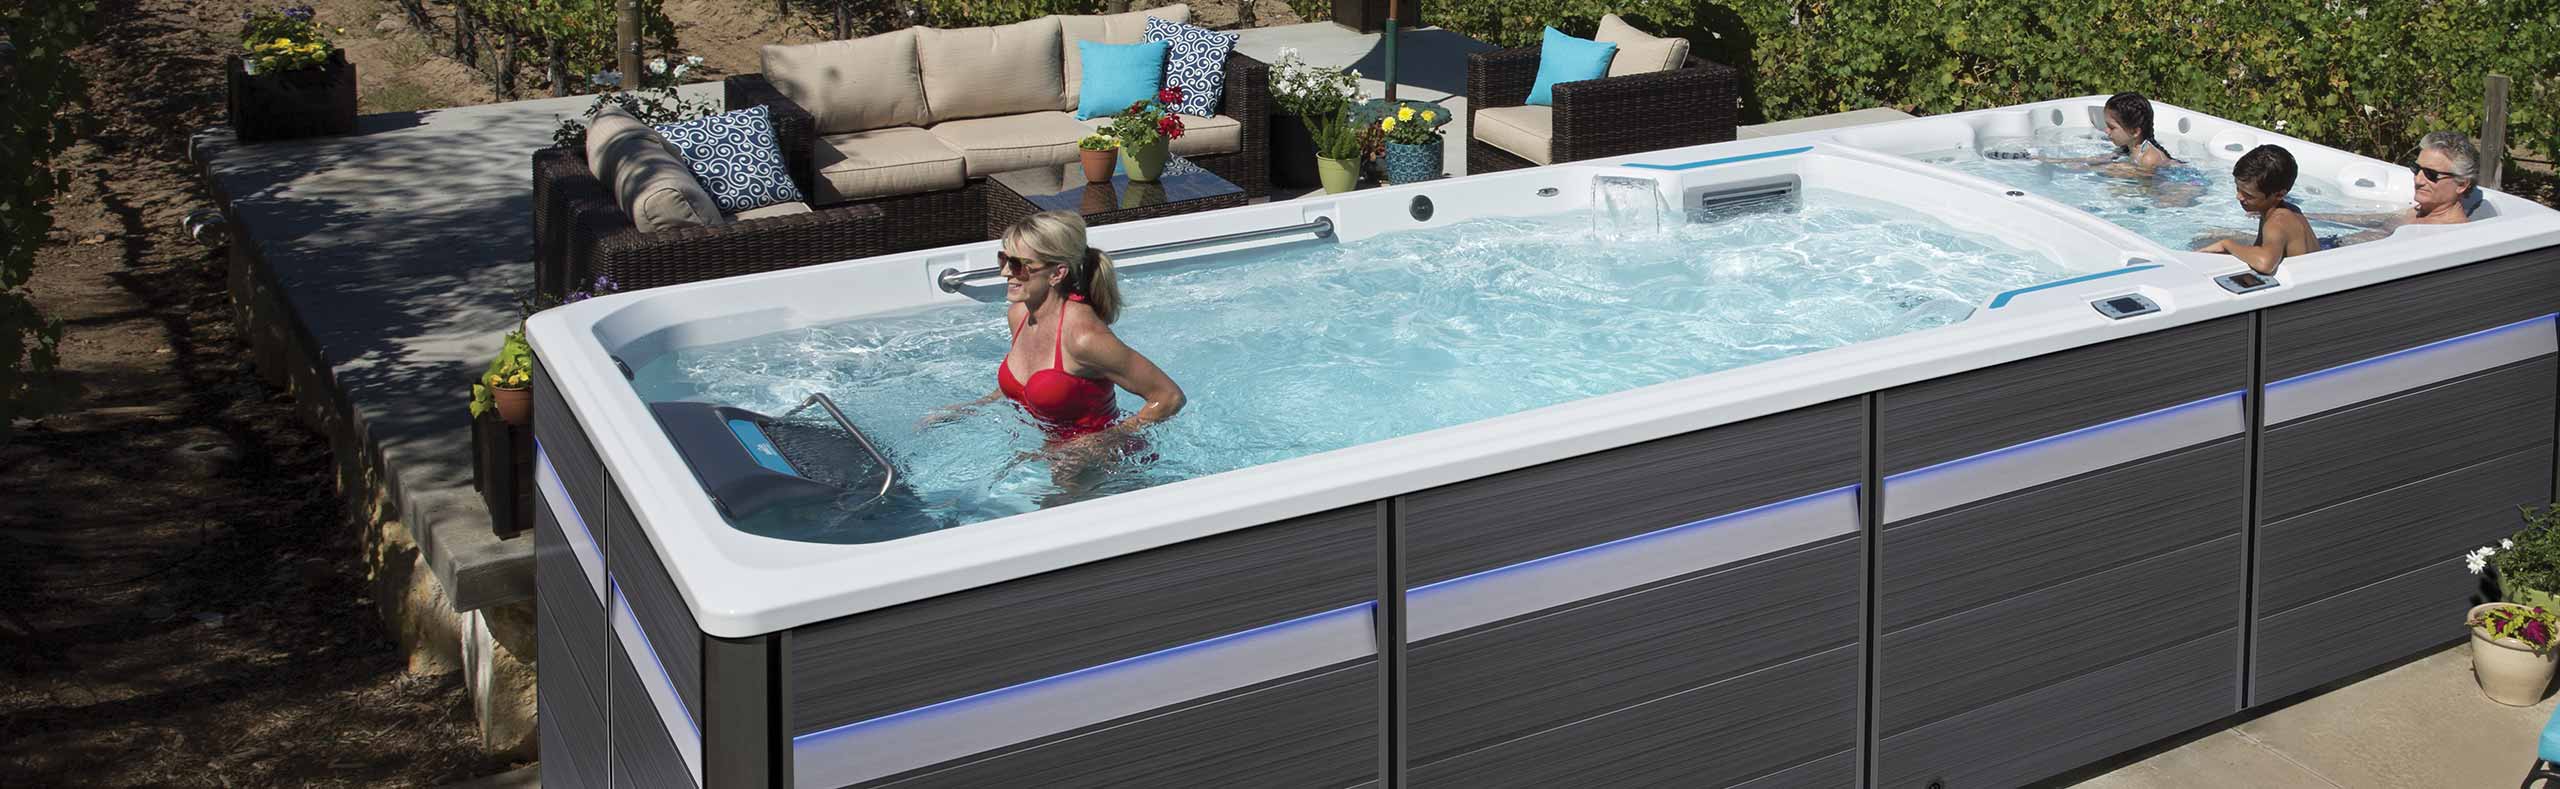 woman using treadmill in a swim spa with family in hot tub section